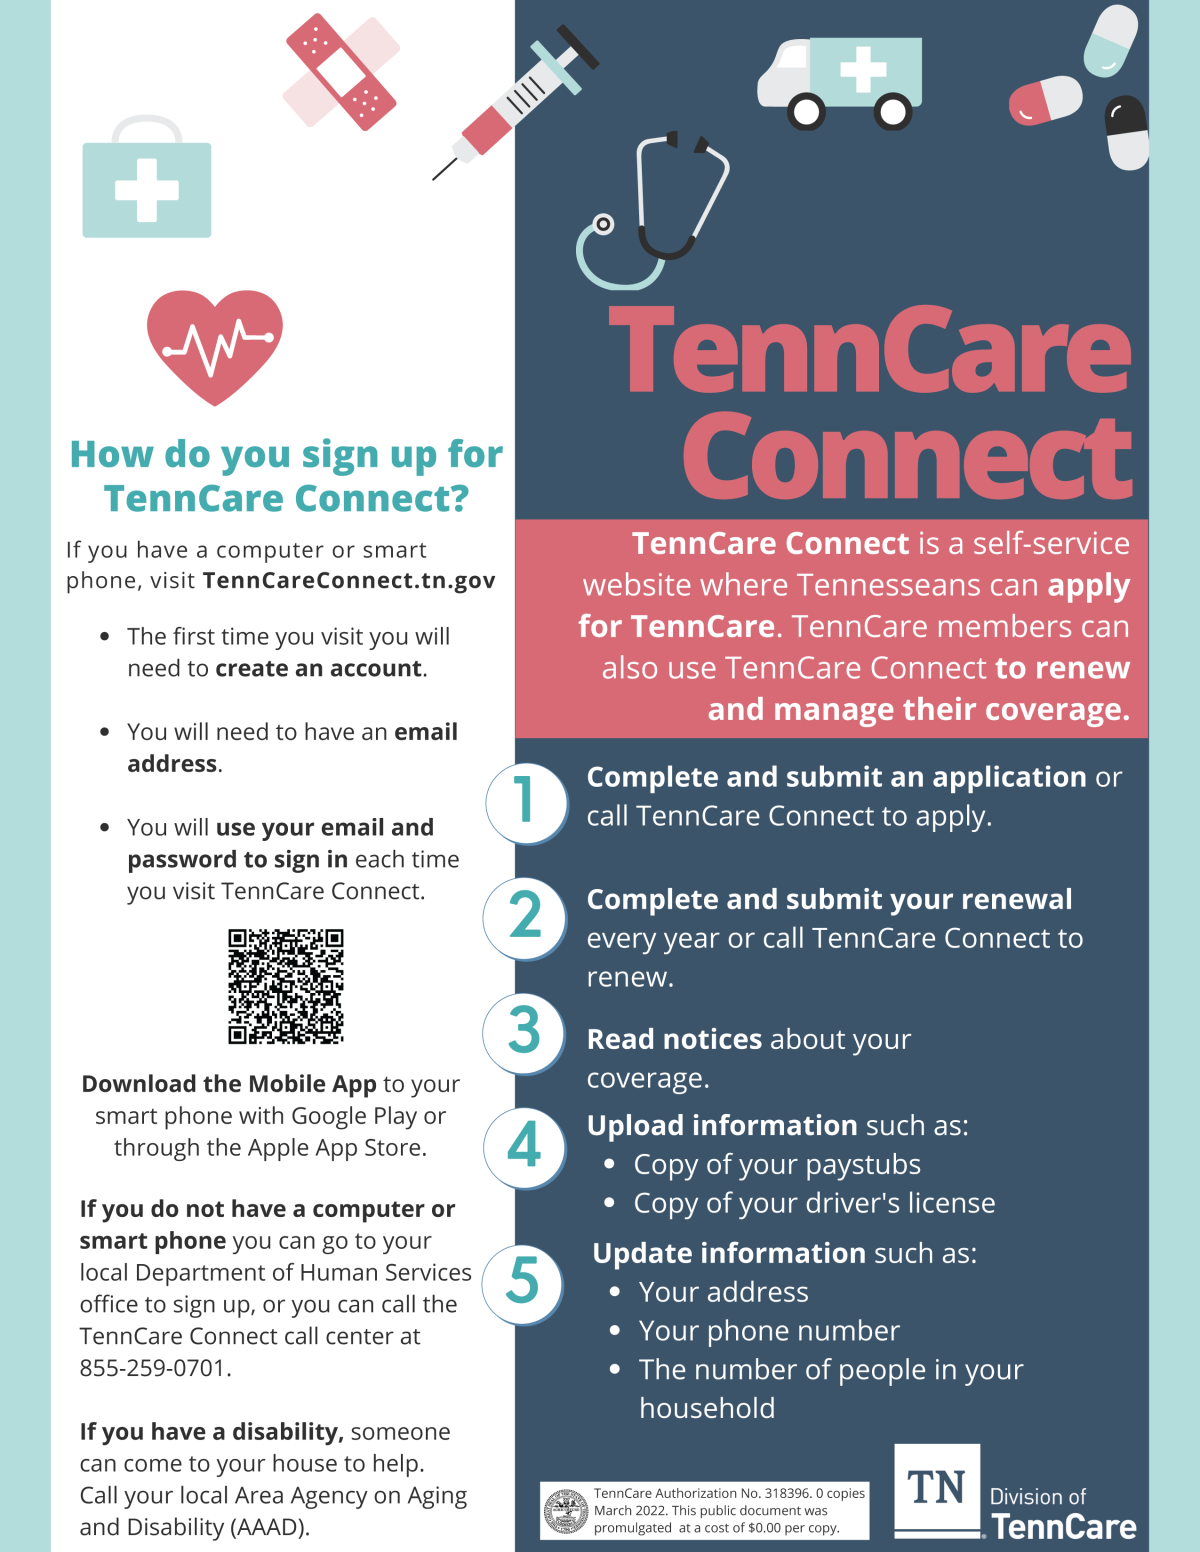 TennCare Connect